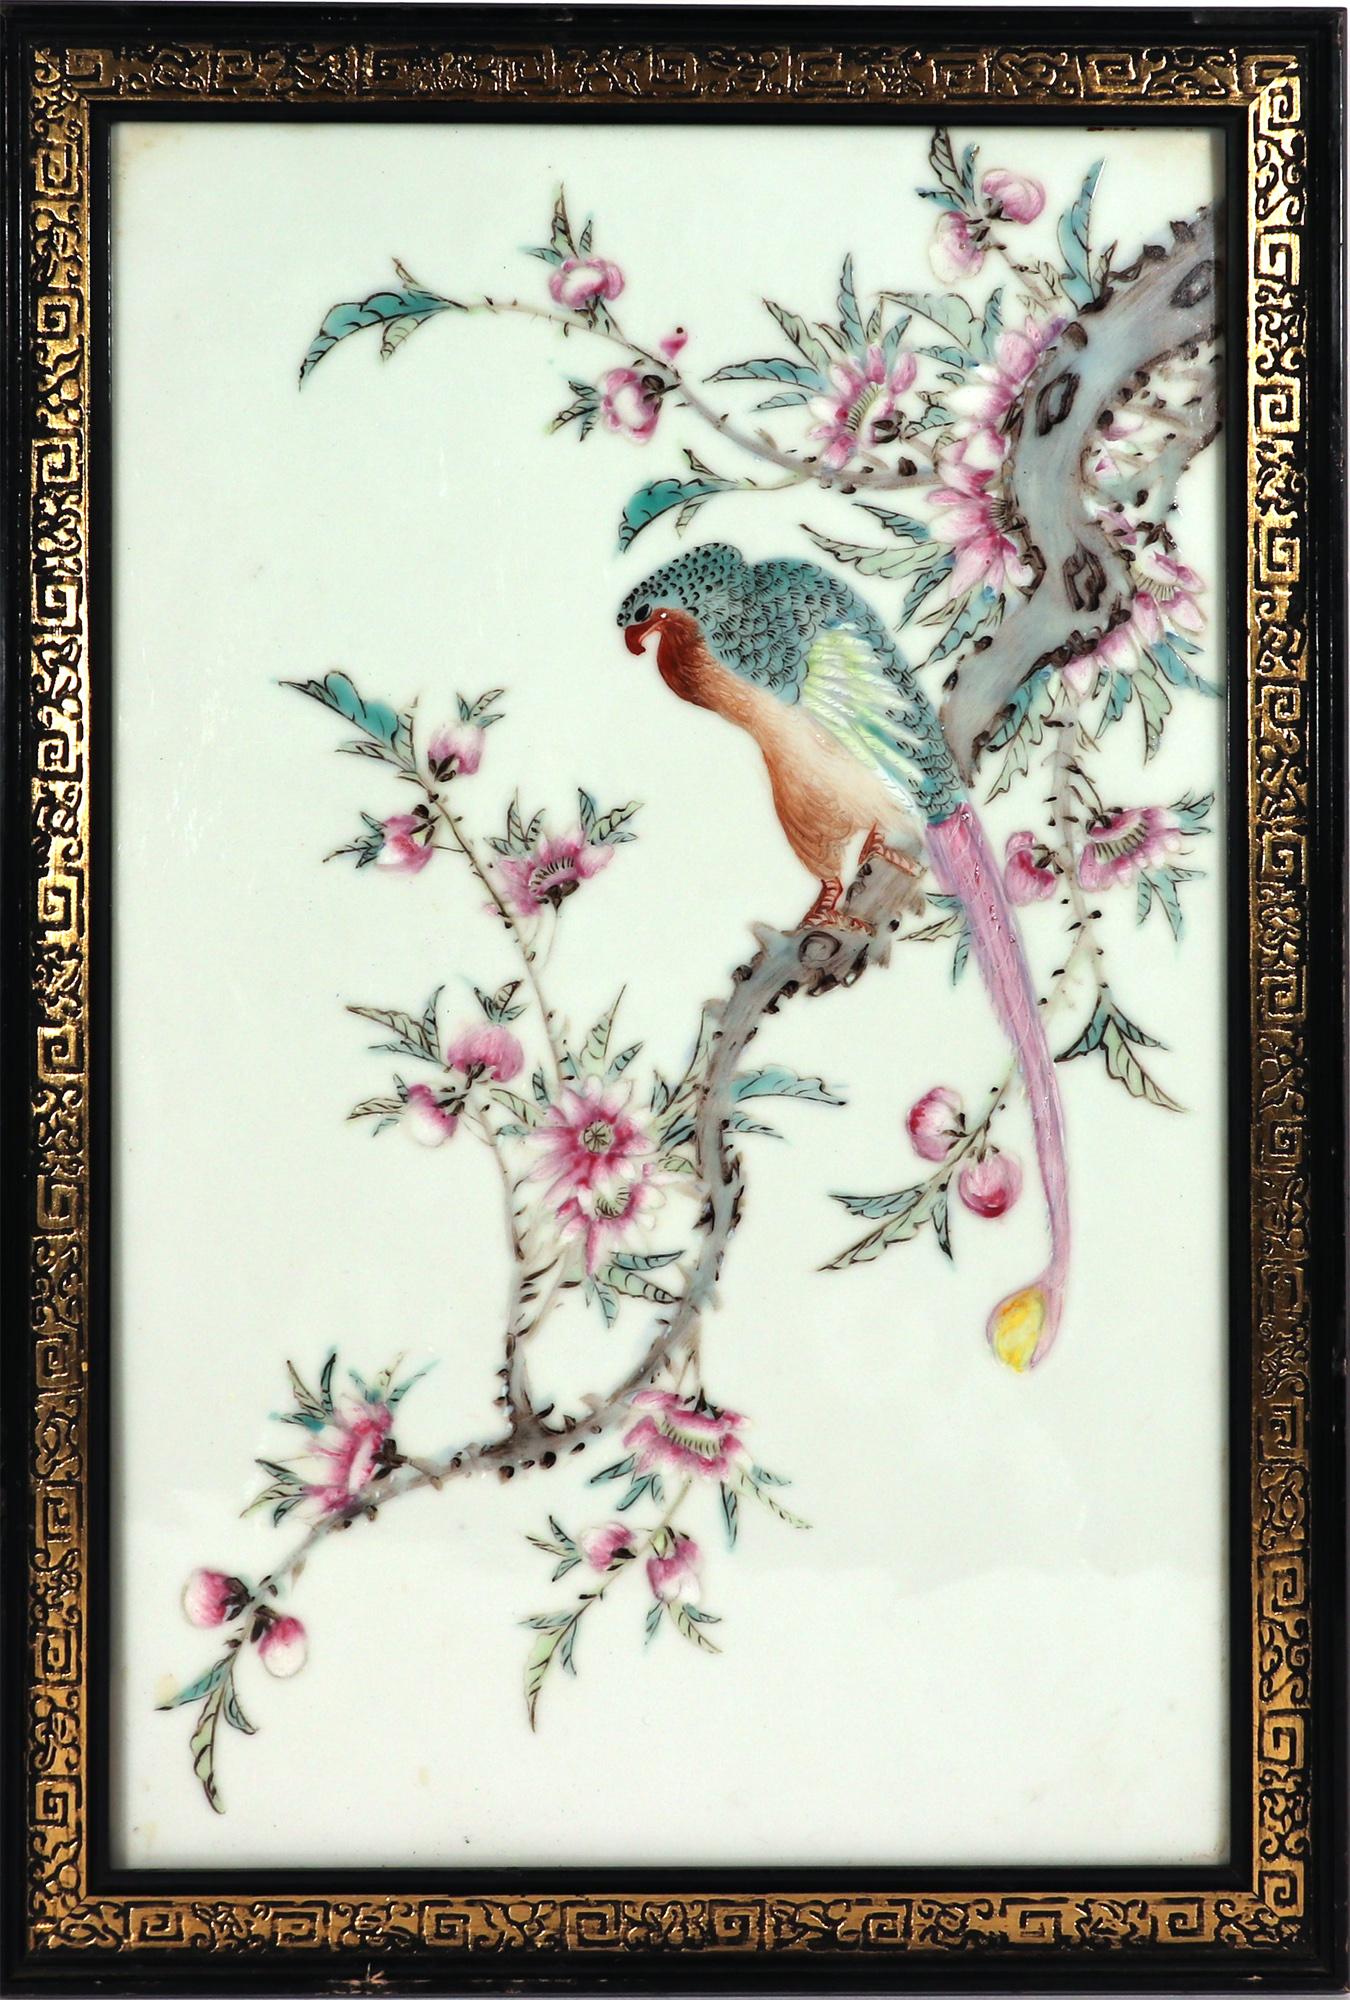 20th Century Chinese Porcelain Plaque

This 20th-century Chinese porcelain plaque features a long-tailed hawk perched on a flowering rose branch. The scene is rendered in the Famille Rose palette, known for its vibrant enamels. The plaque is